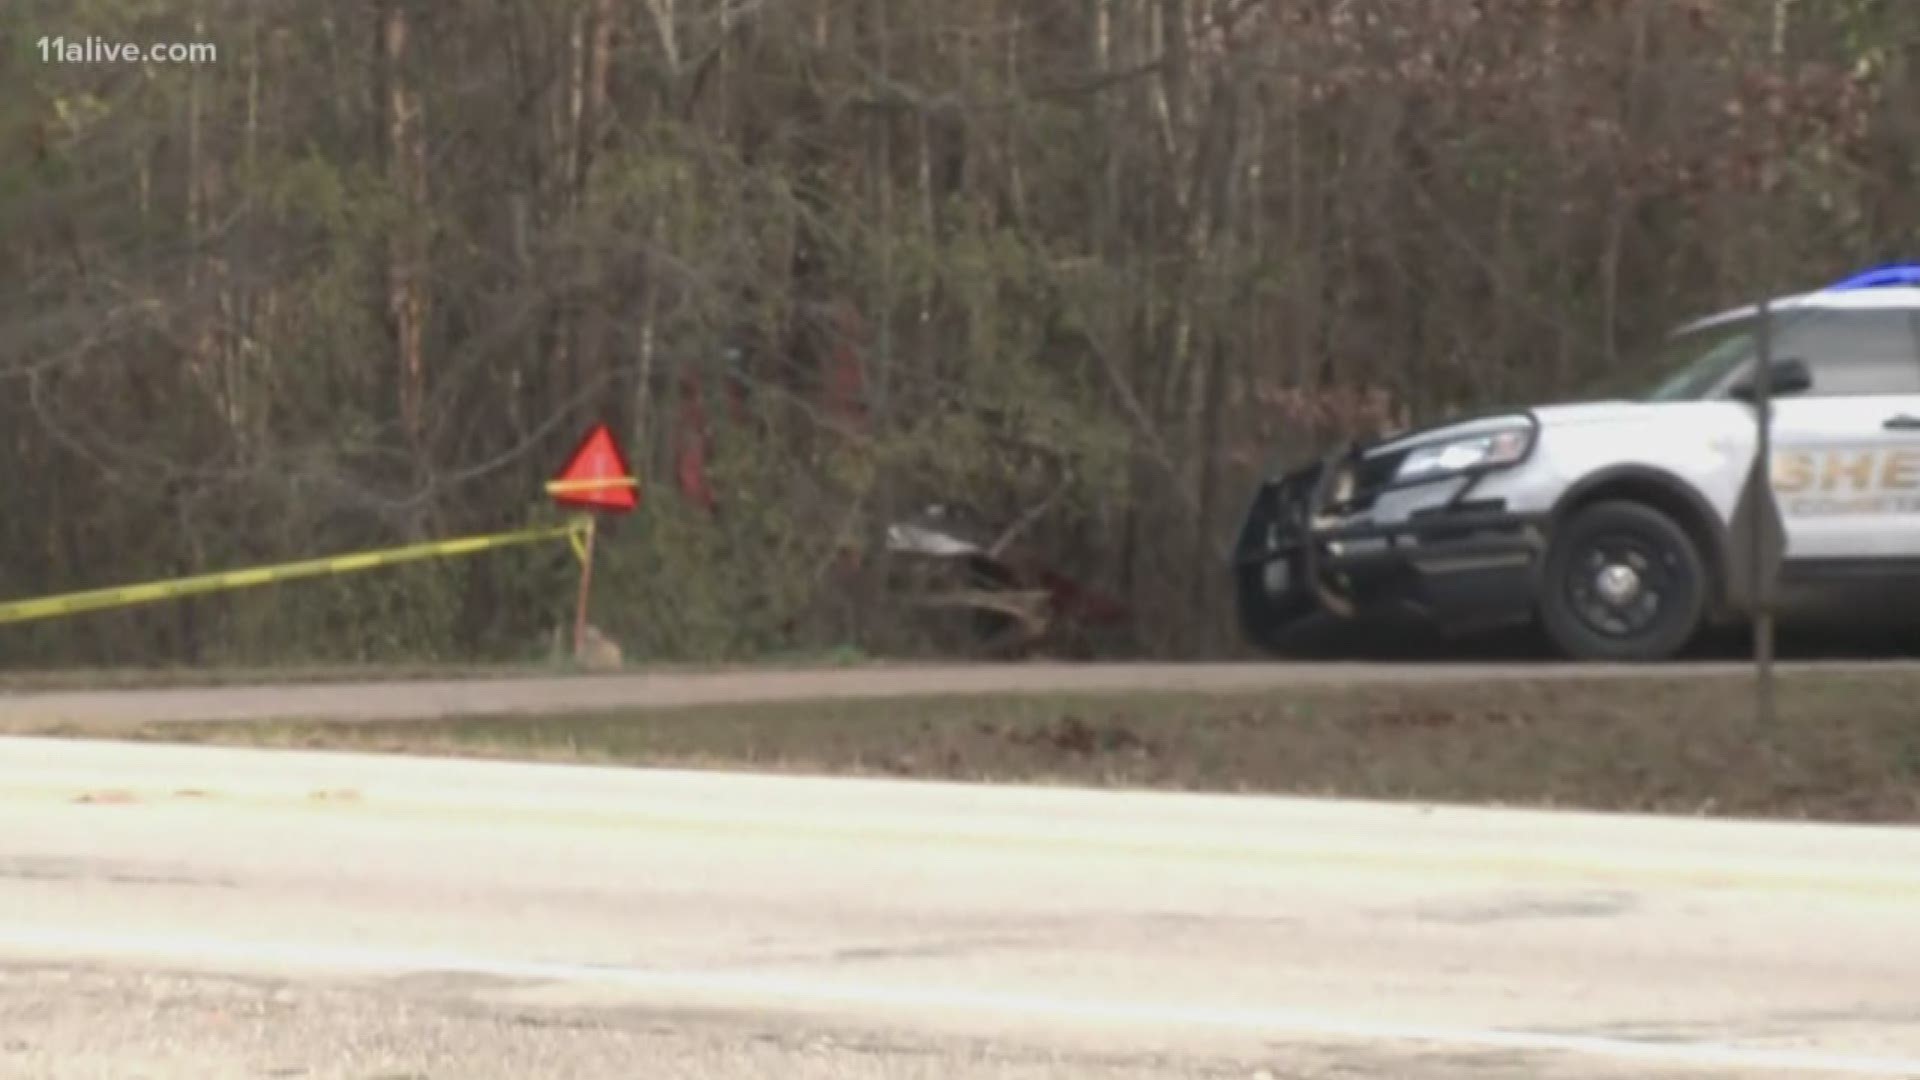 The NTSB was expected to arrive Sunday afternoon to continue the investigation of a plane crash that killed two people near Senoia late Saturday afternoon.